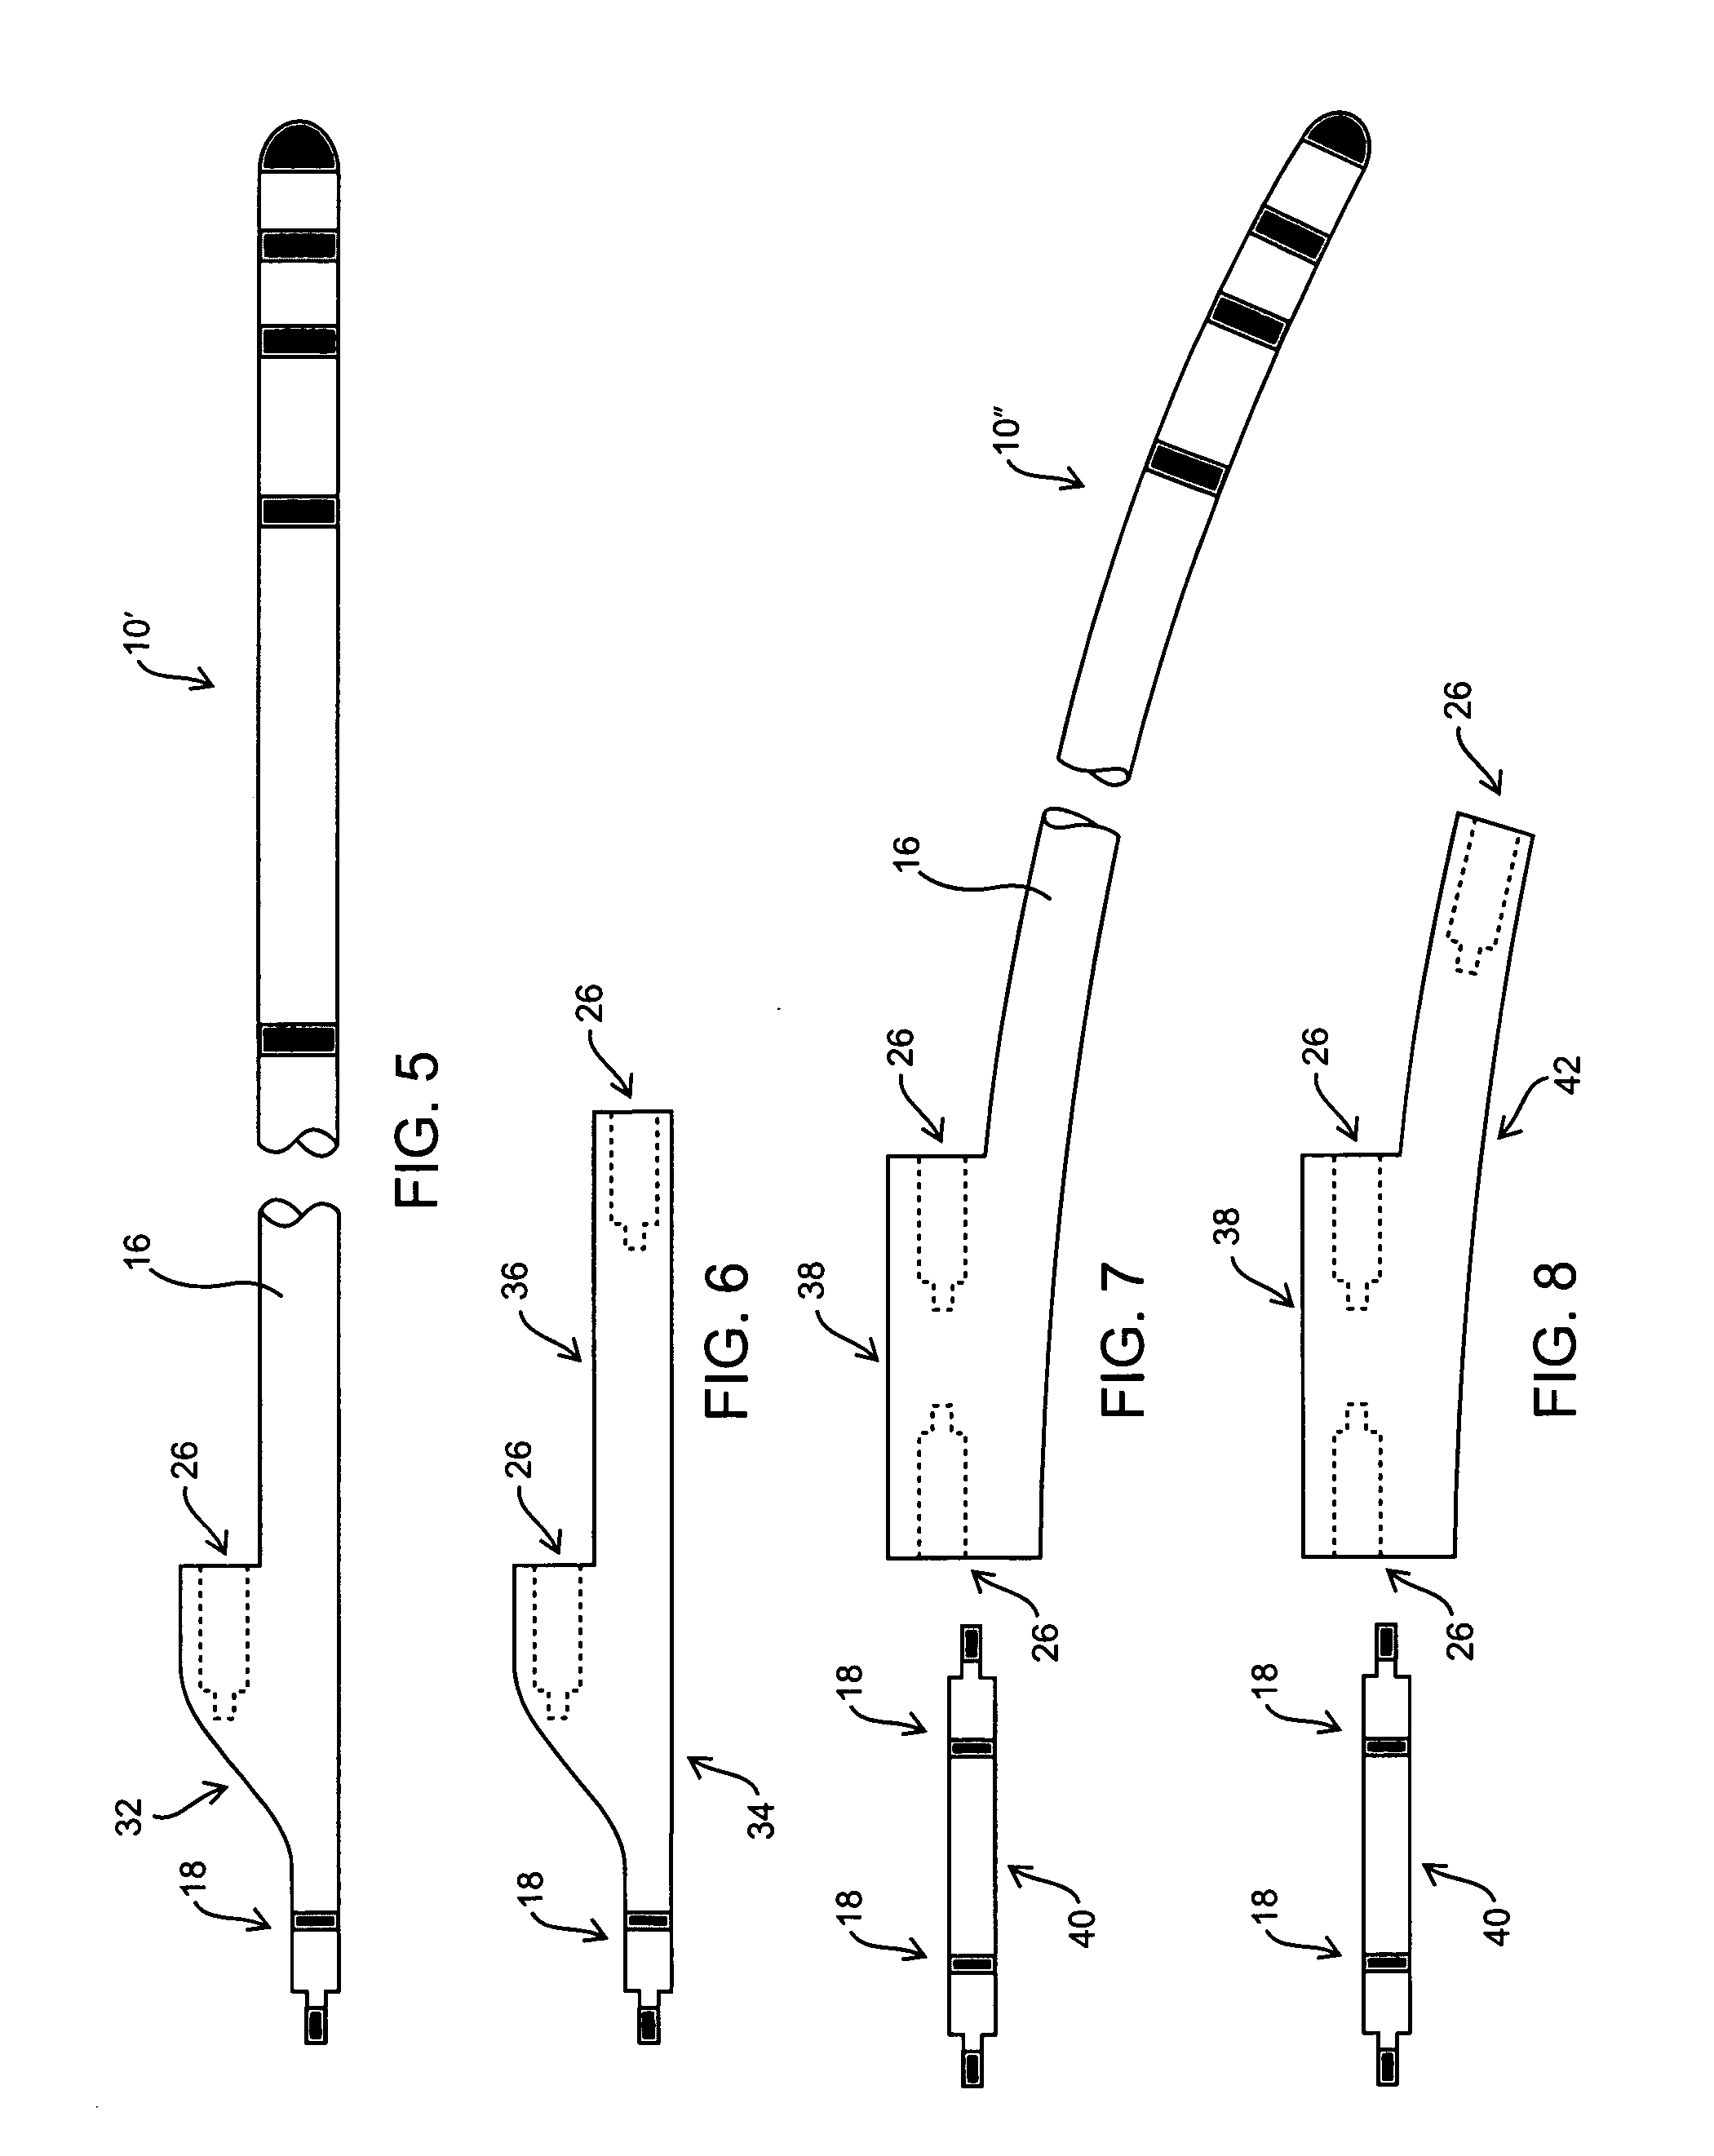 Universal connector for implantable medical device